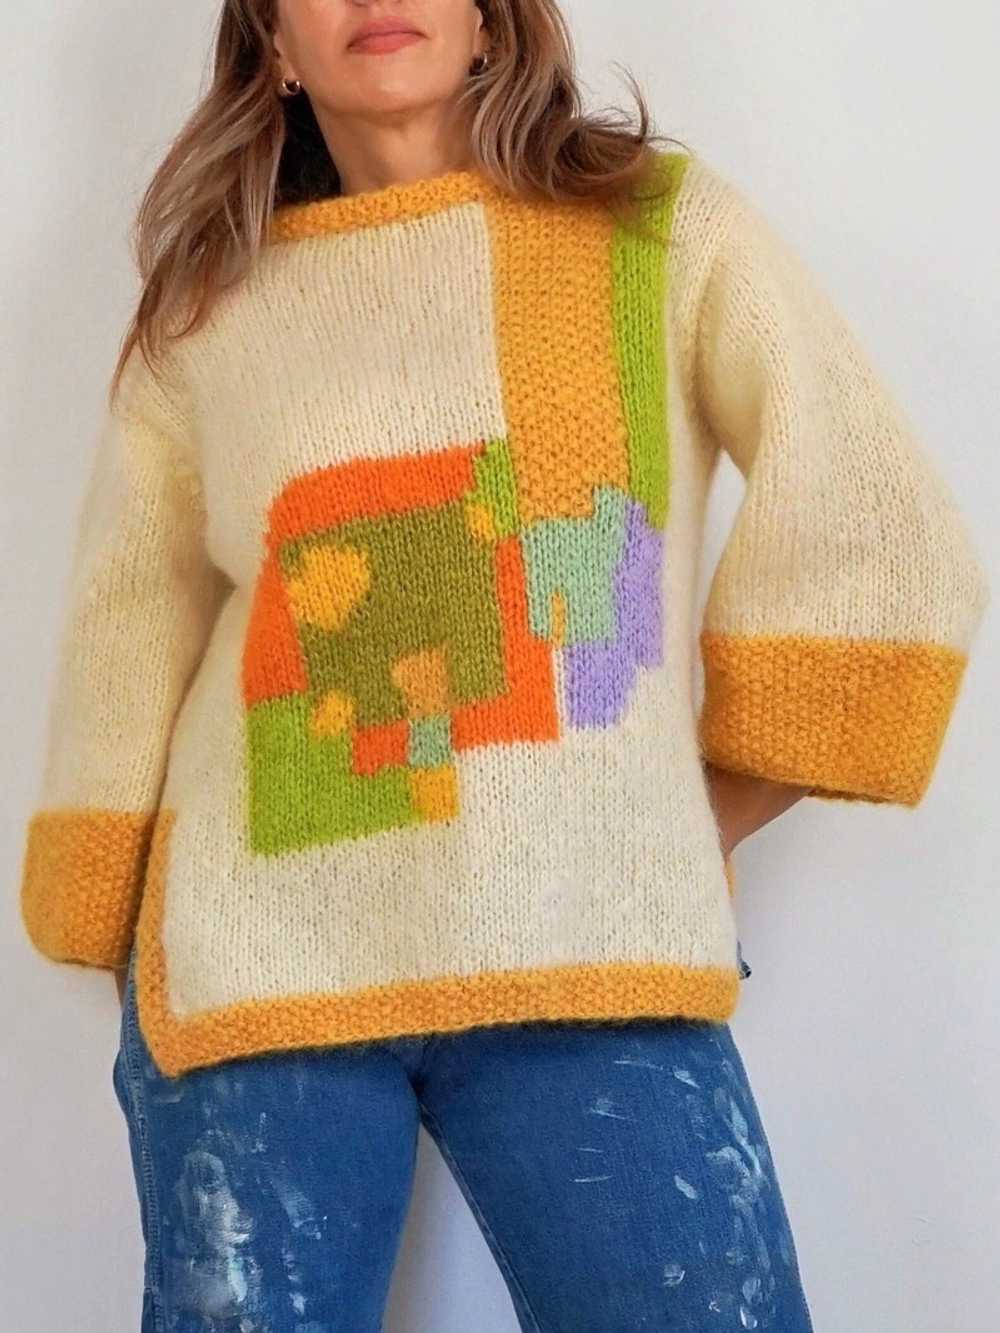 60's Mohair Sweater - image 2